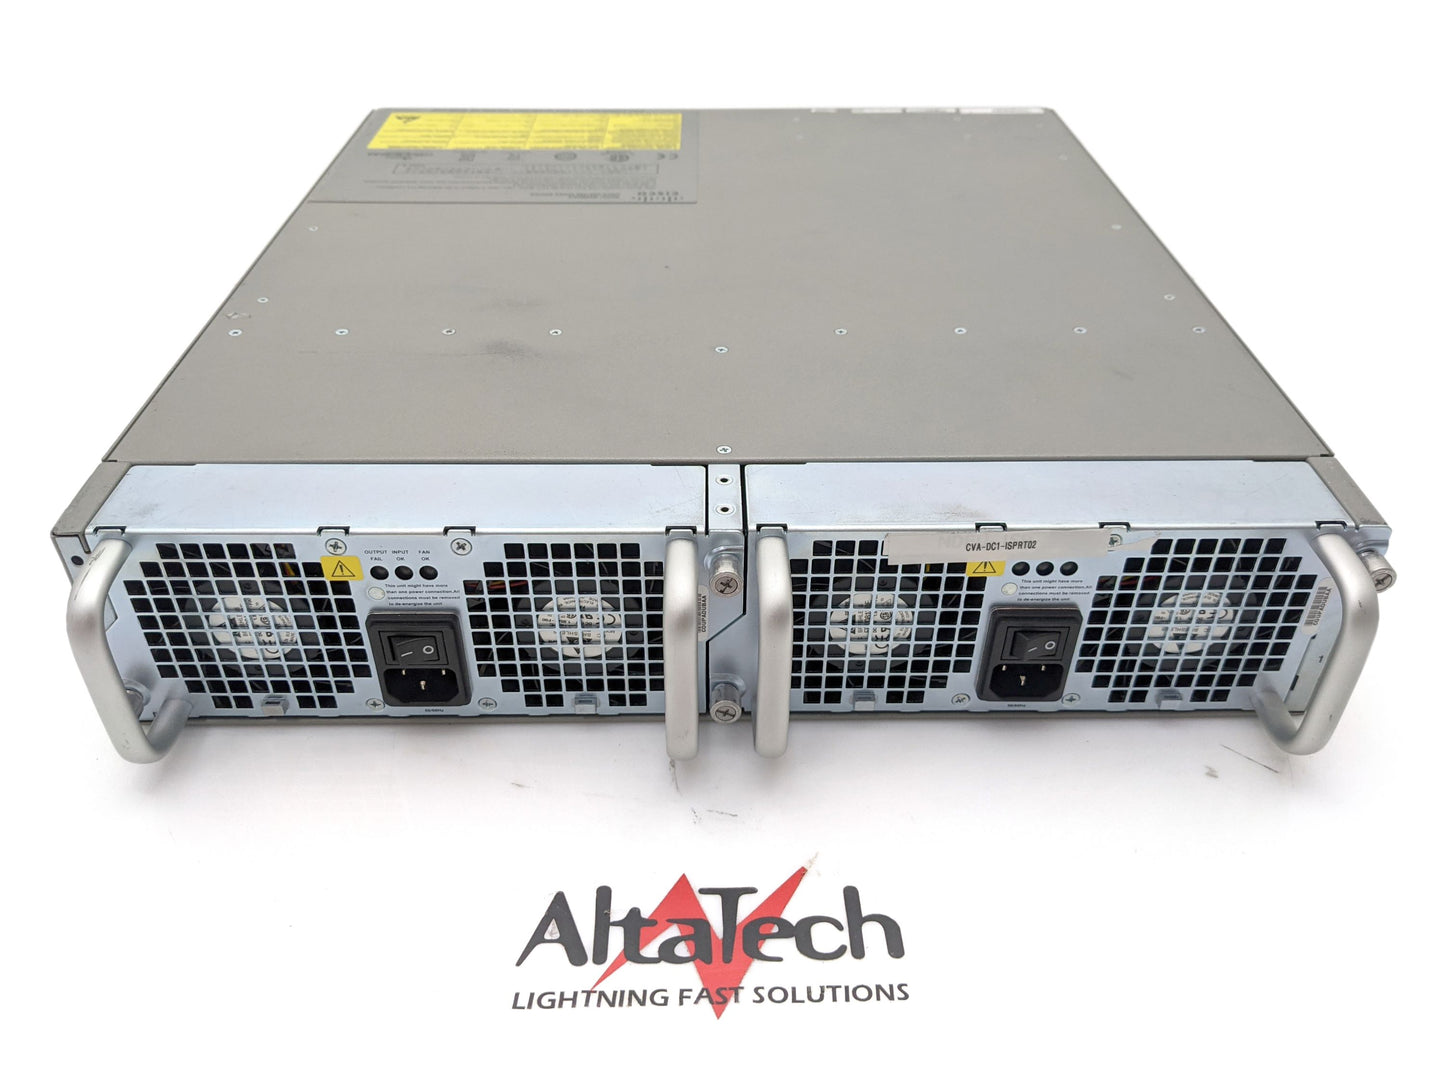 Cisco ASR1002 4-Port 1Gbps Ethernet SFP Aggregated Services Router Chassis, for ASR 1000 Series, Used